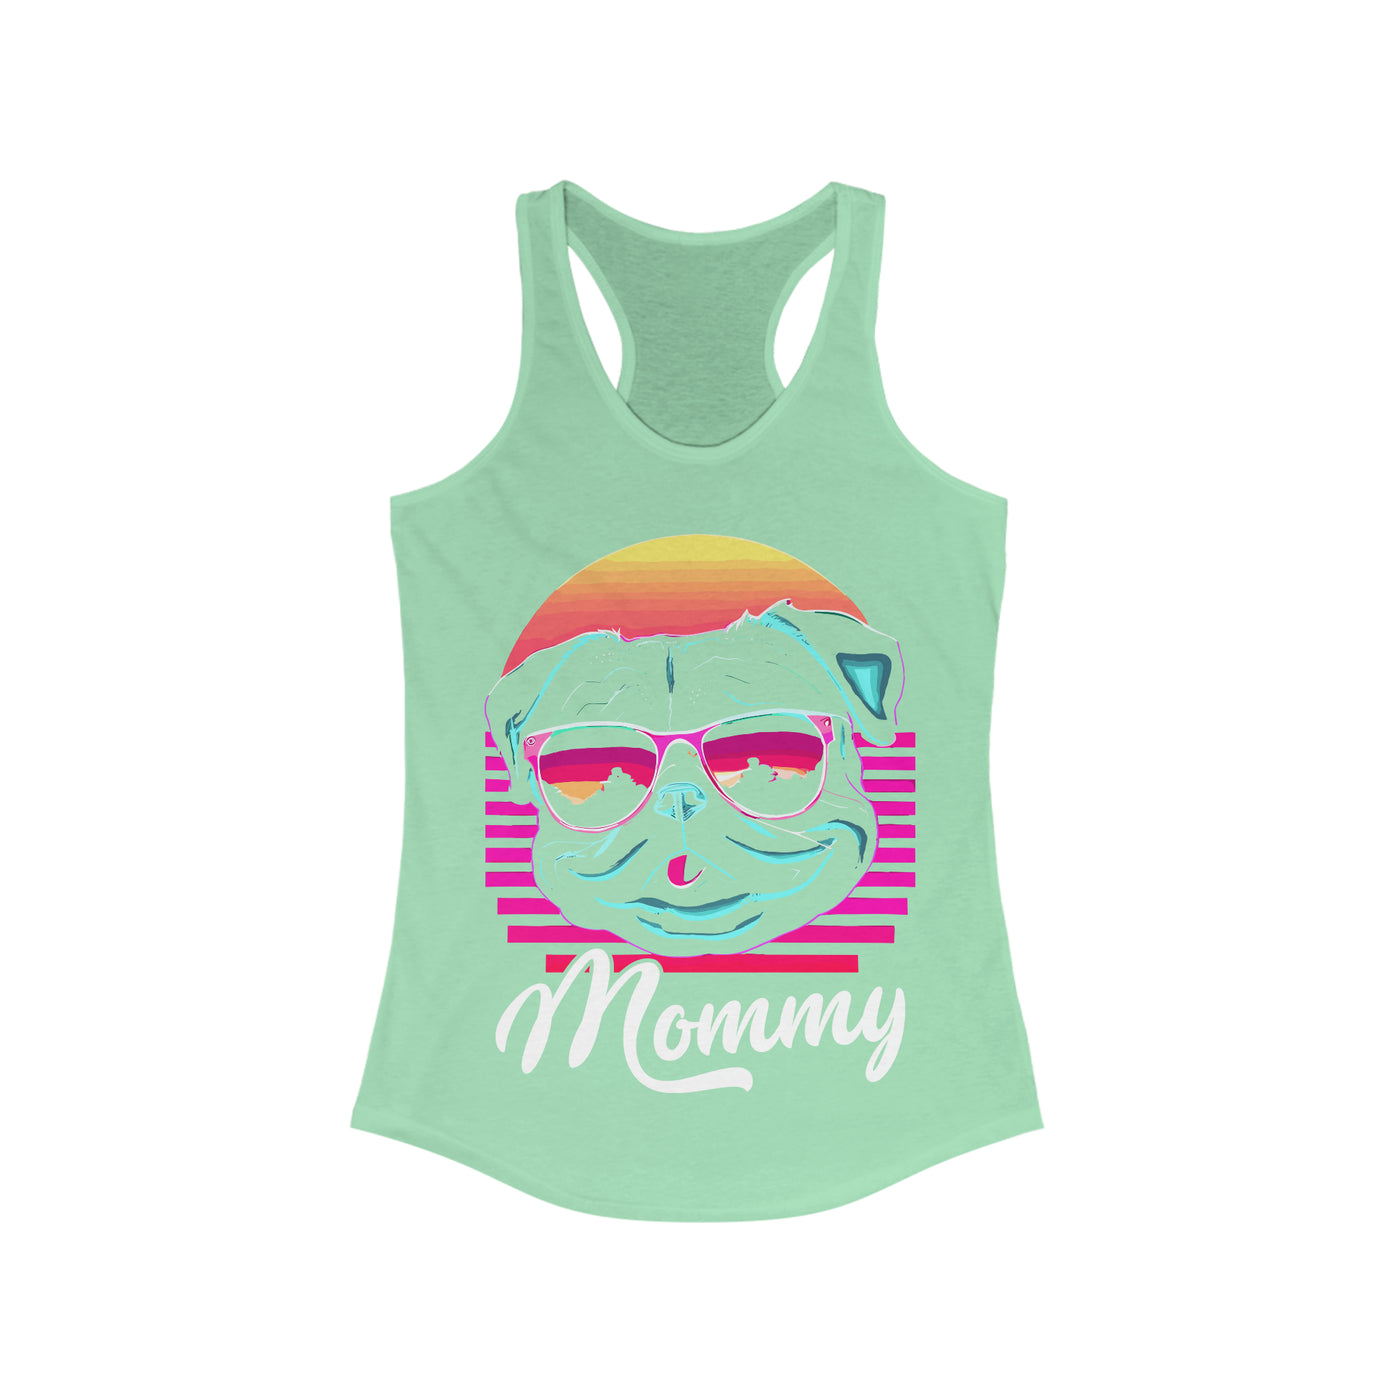 Pug Mommy Synthwave Colored Print Tank Top